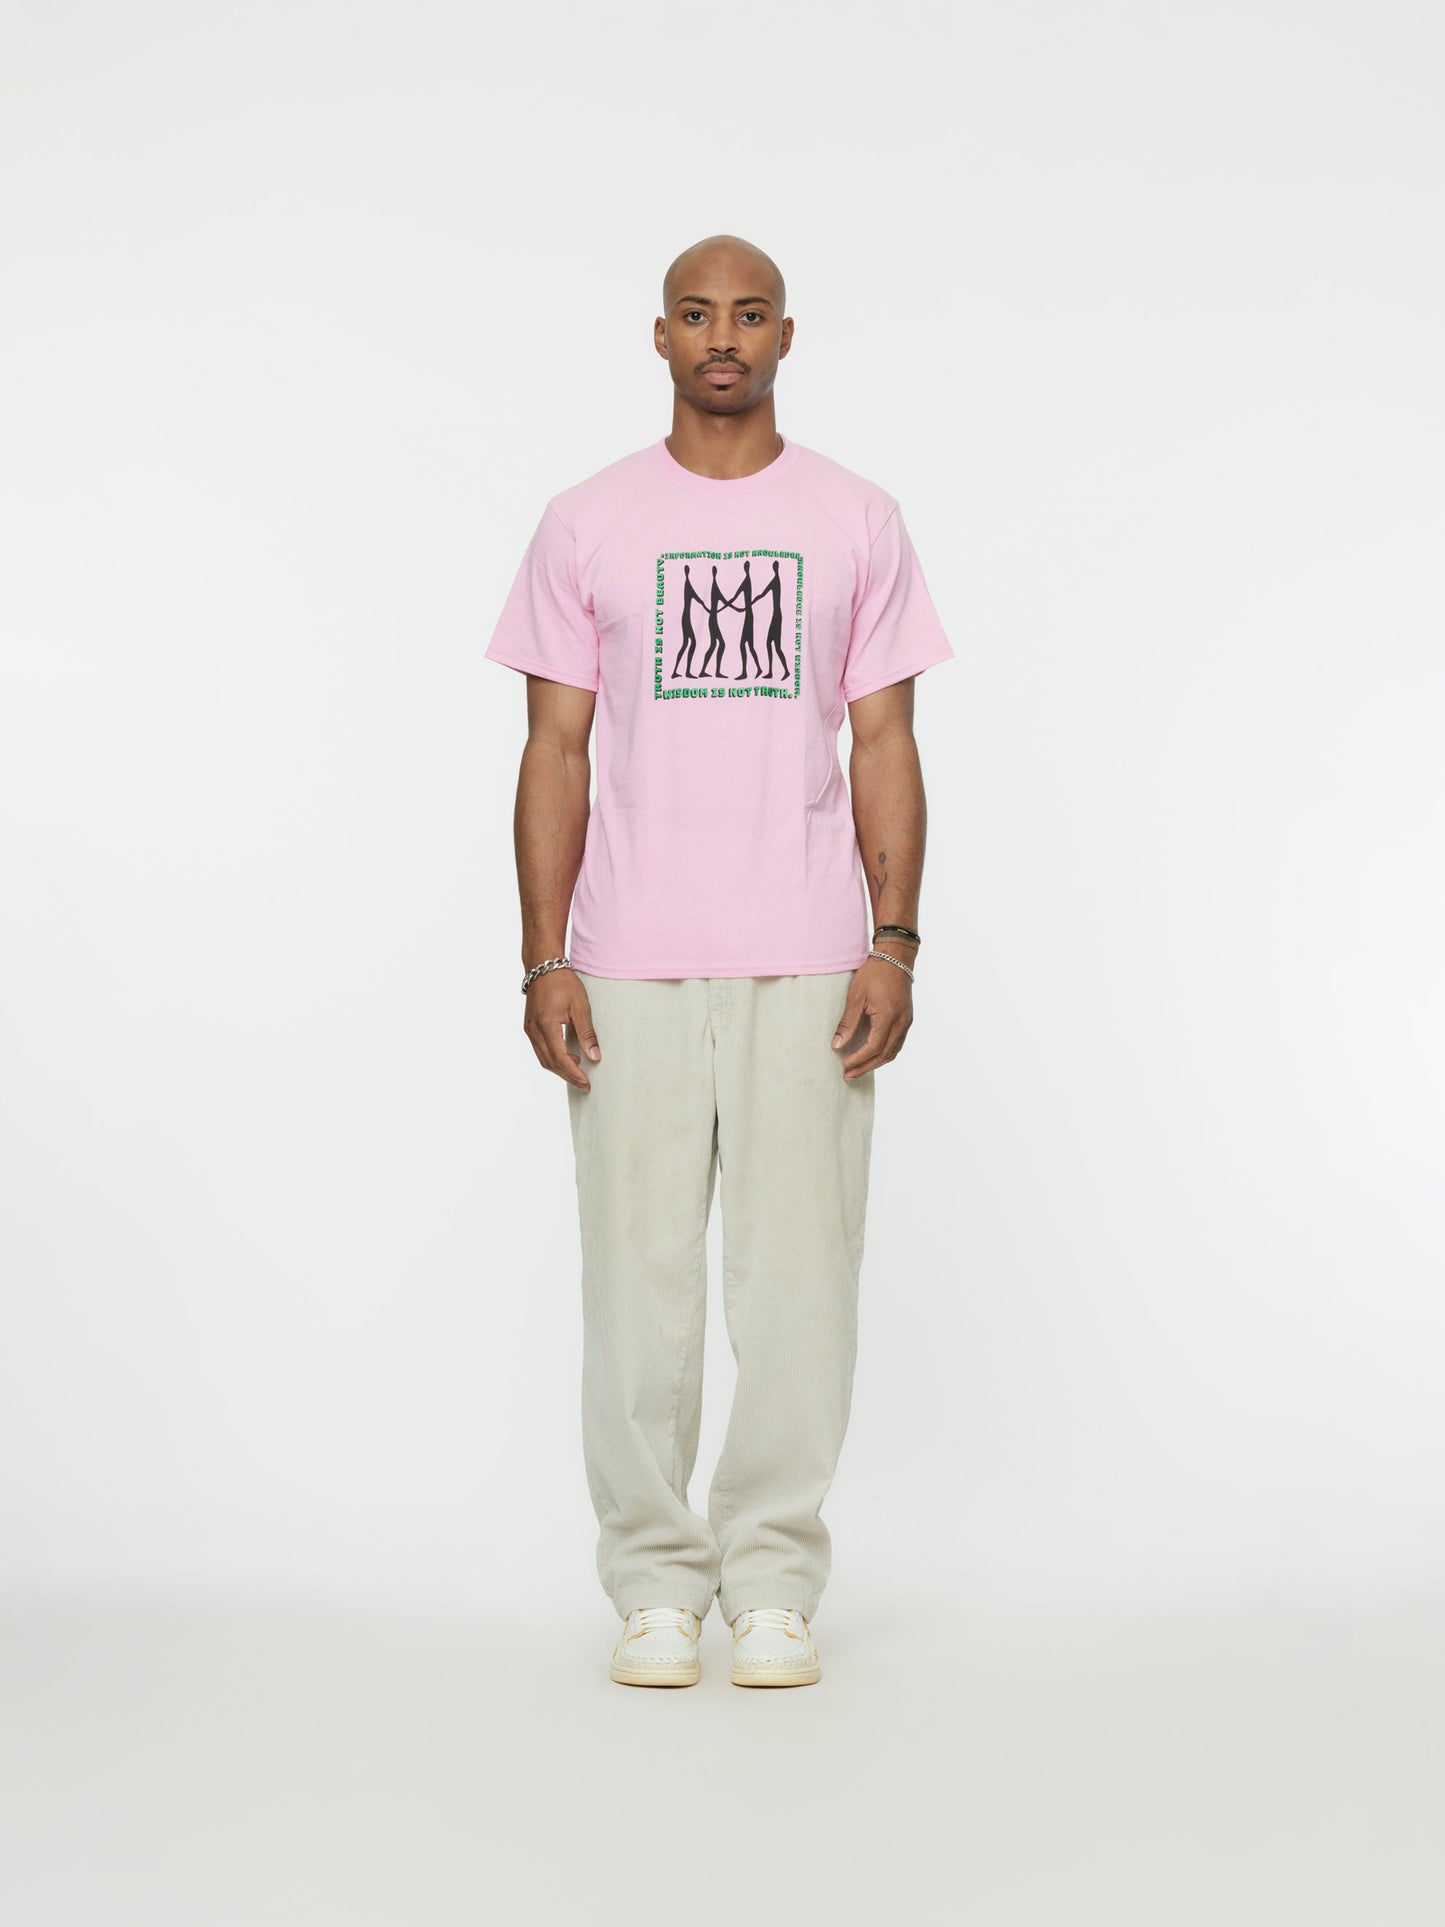 Truth is Beauty Tee (Pink)